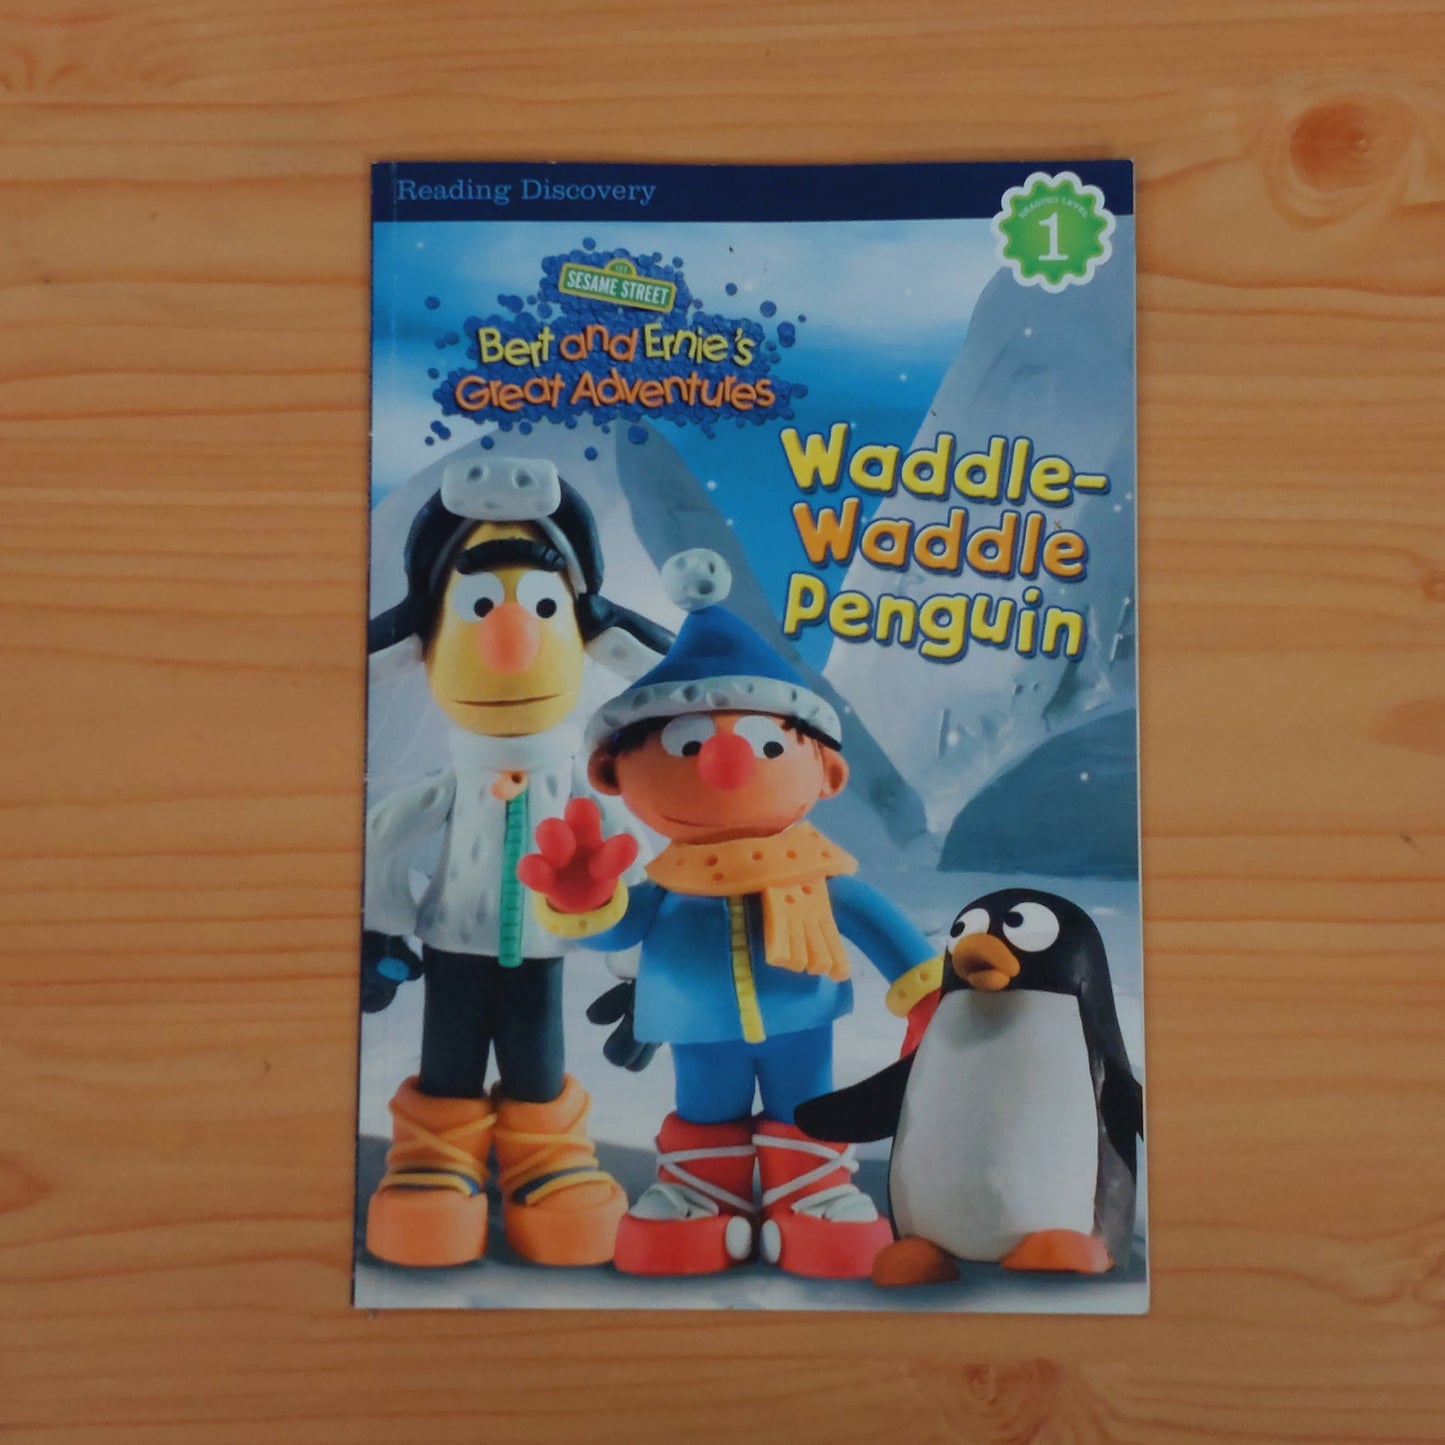 Reading Discovery: Level 1 - Sesame Street: Bert and Ernie's Great Adventures: Waddle-Waddle Penguin